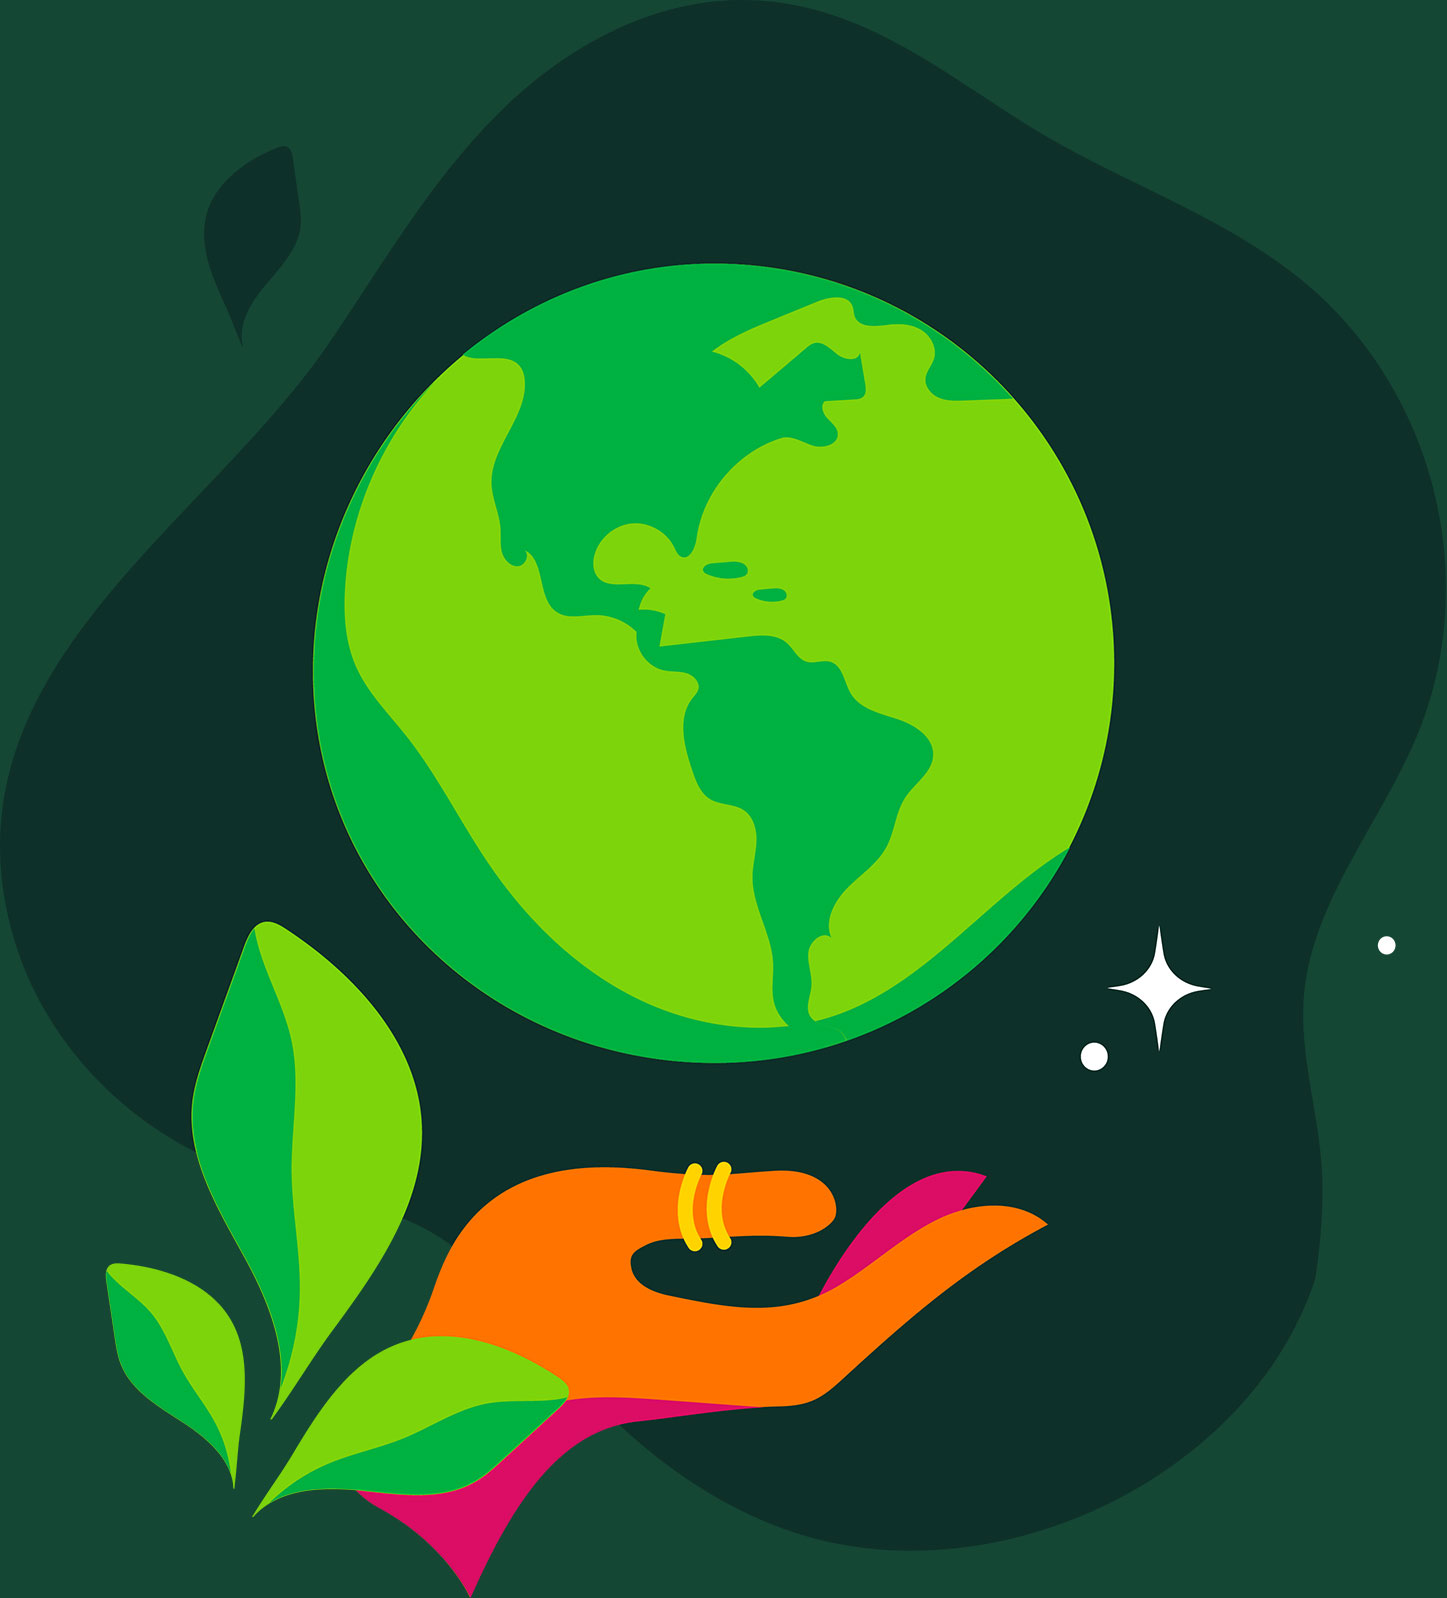 Illustration of hand holding up earth with leaves